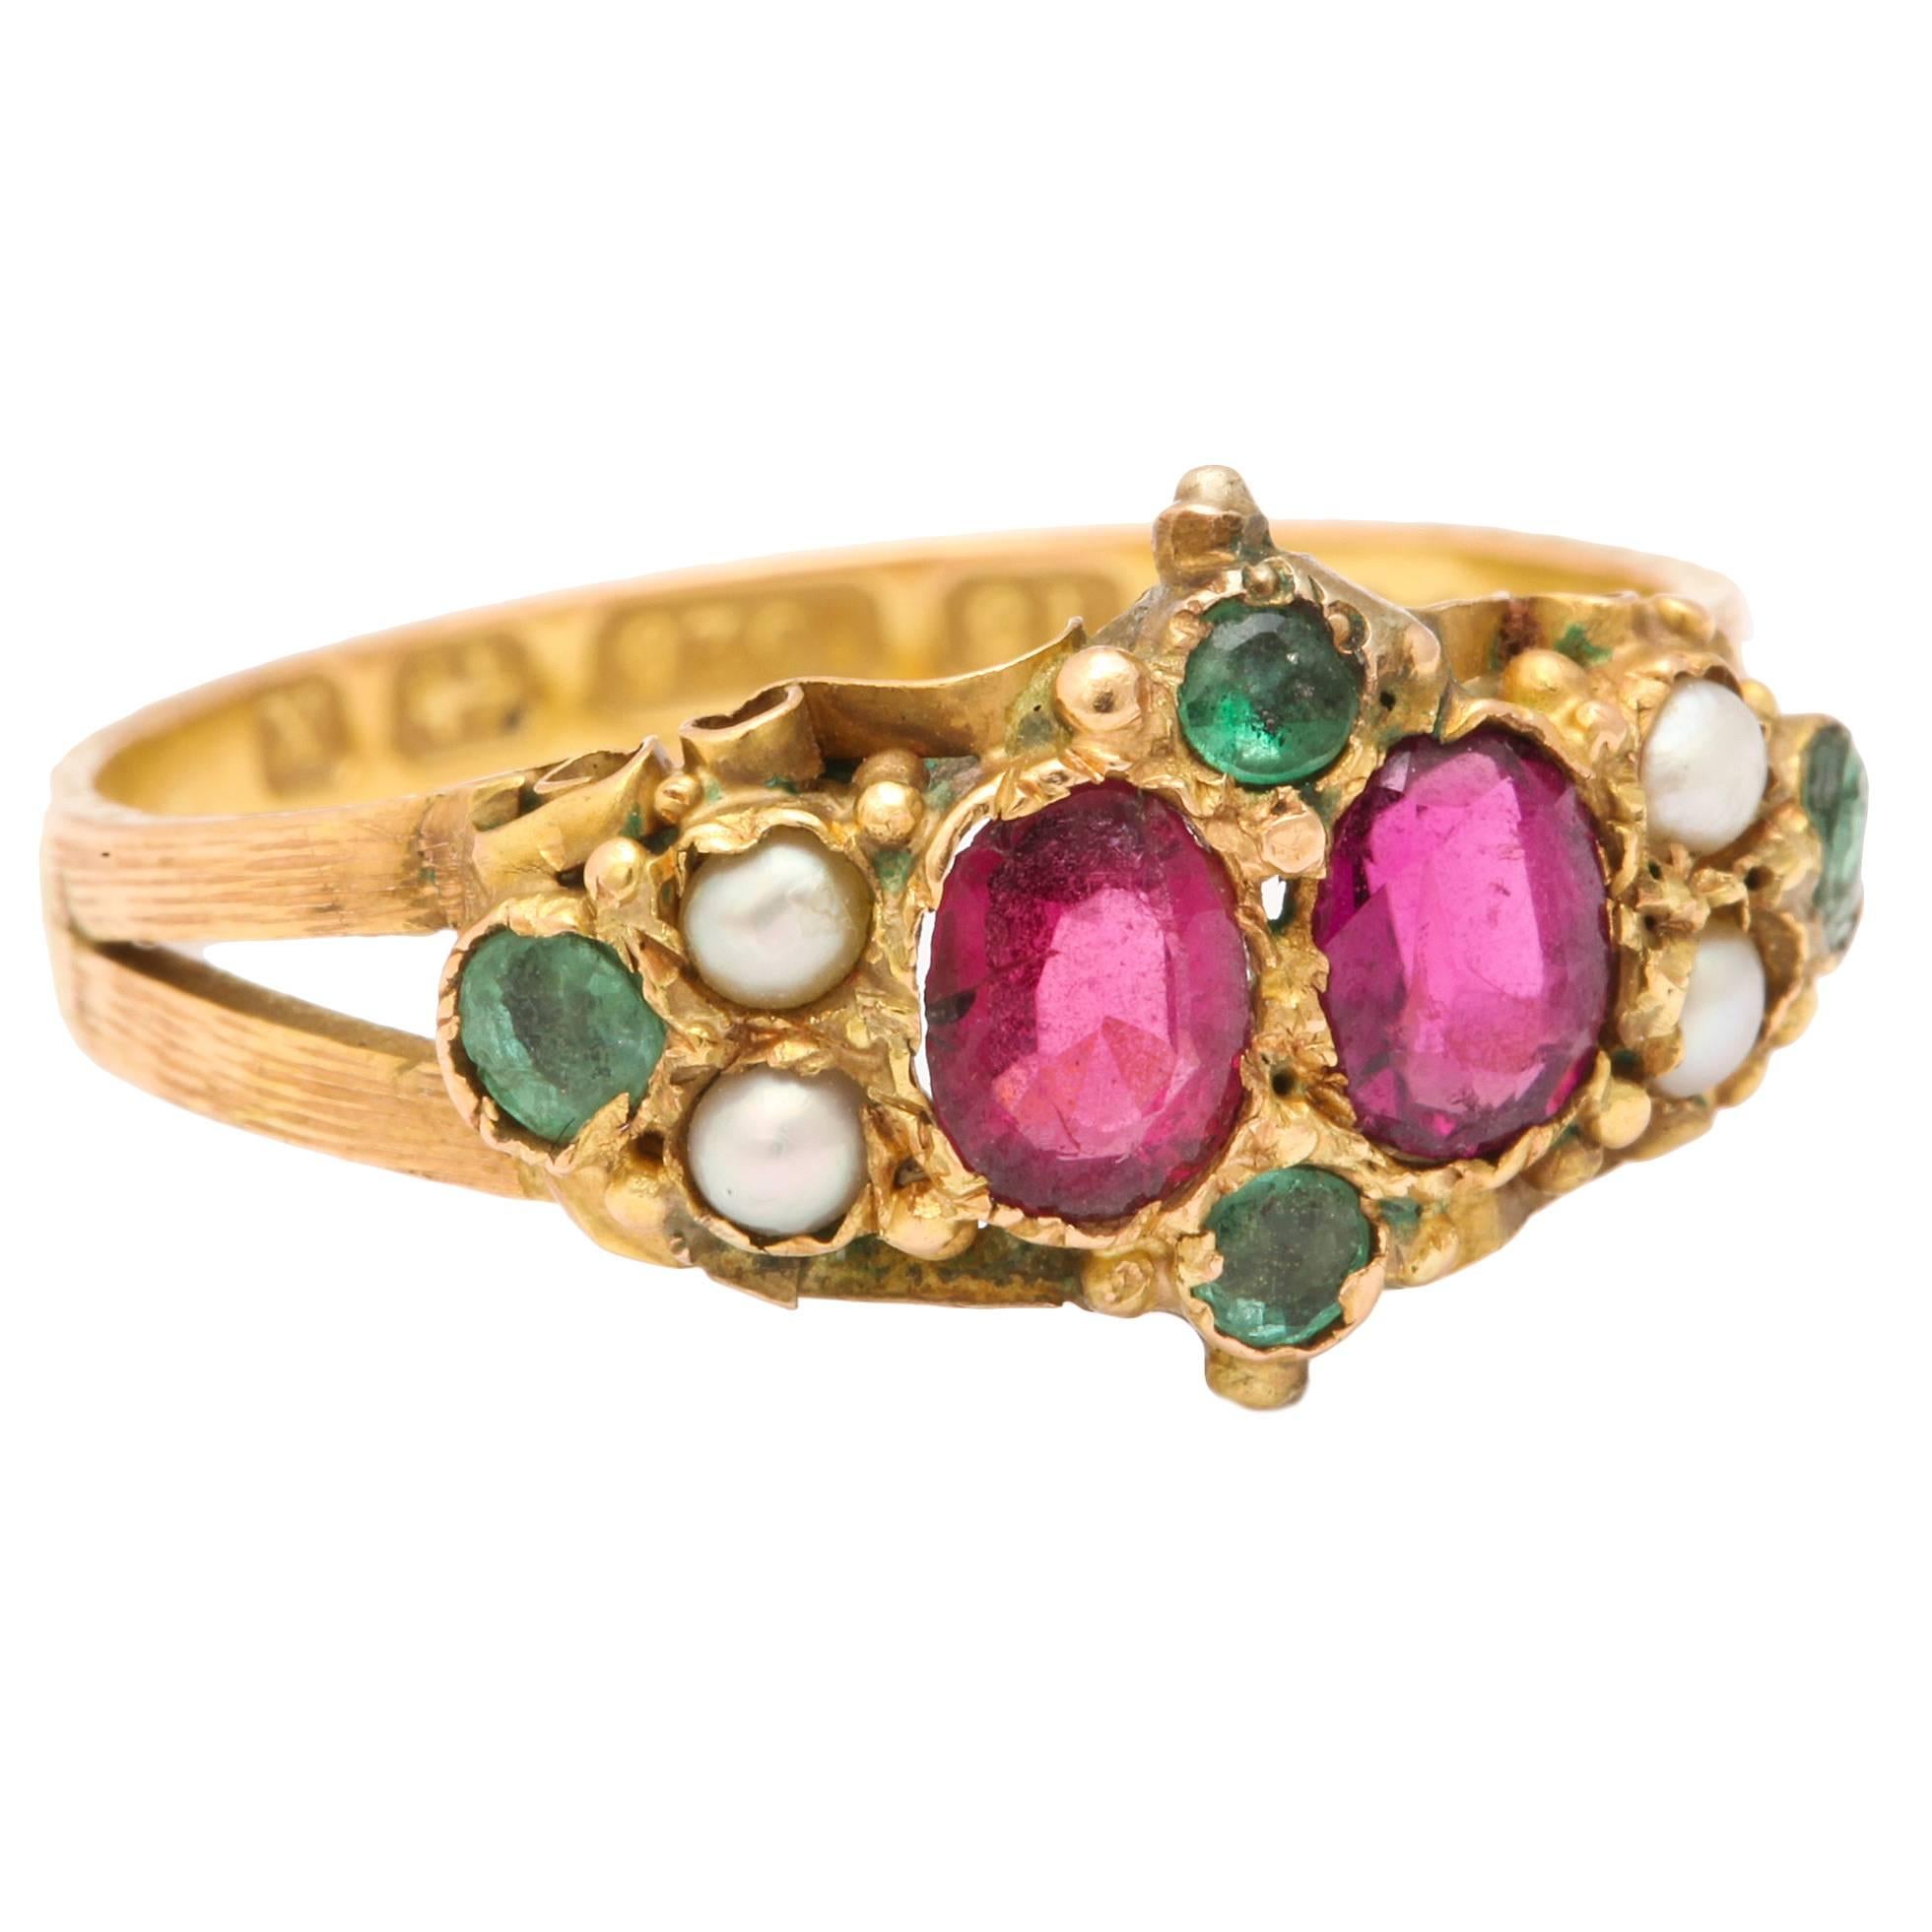 Endearing Ring of Rubies, Emeralds and Pearls 